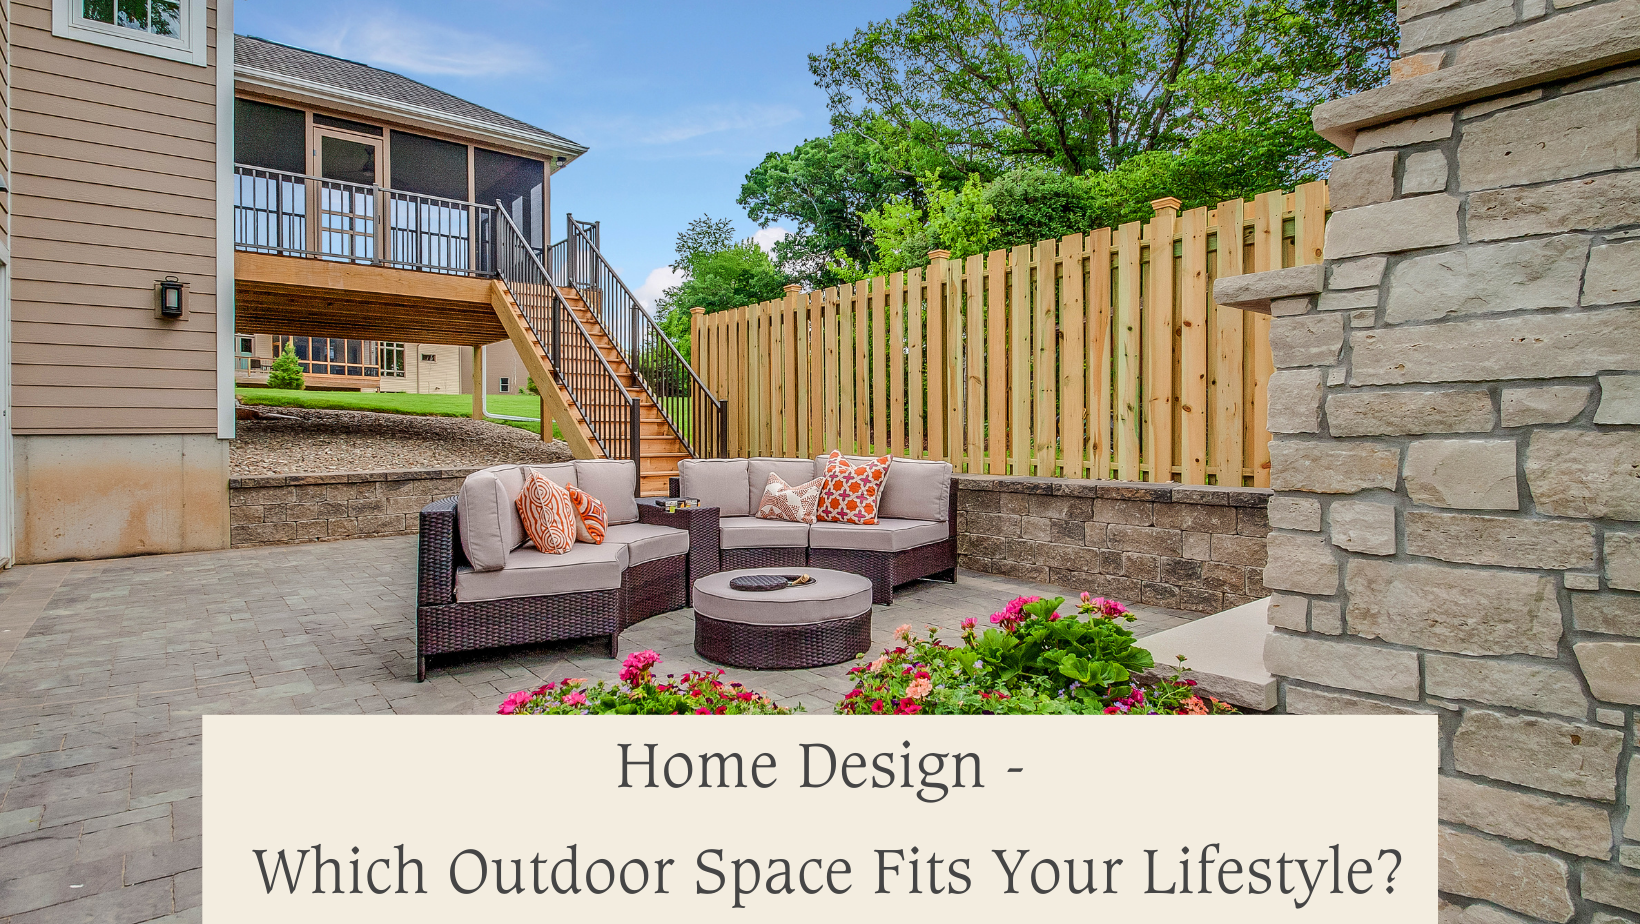 Home Design - Which Outdoor Space Fits Your Lifestyle?